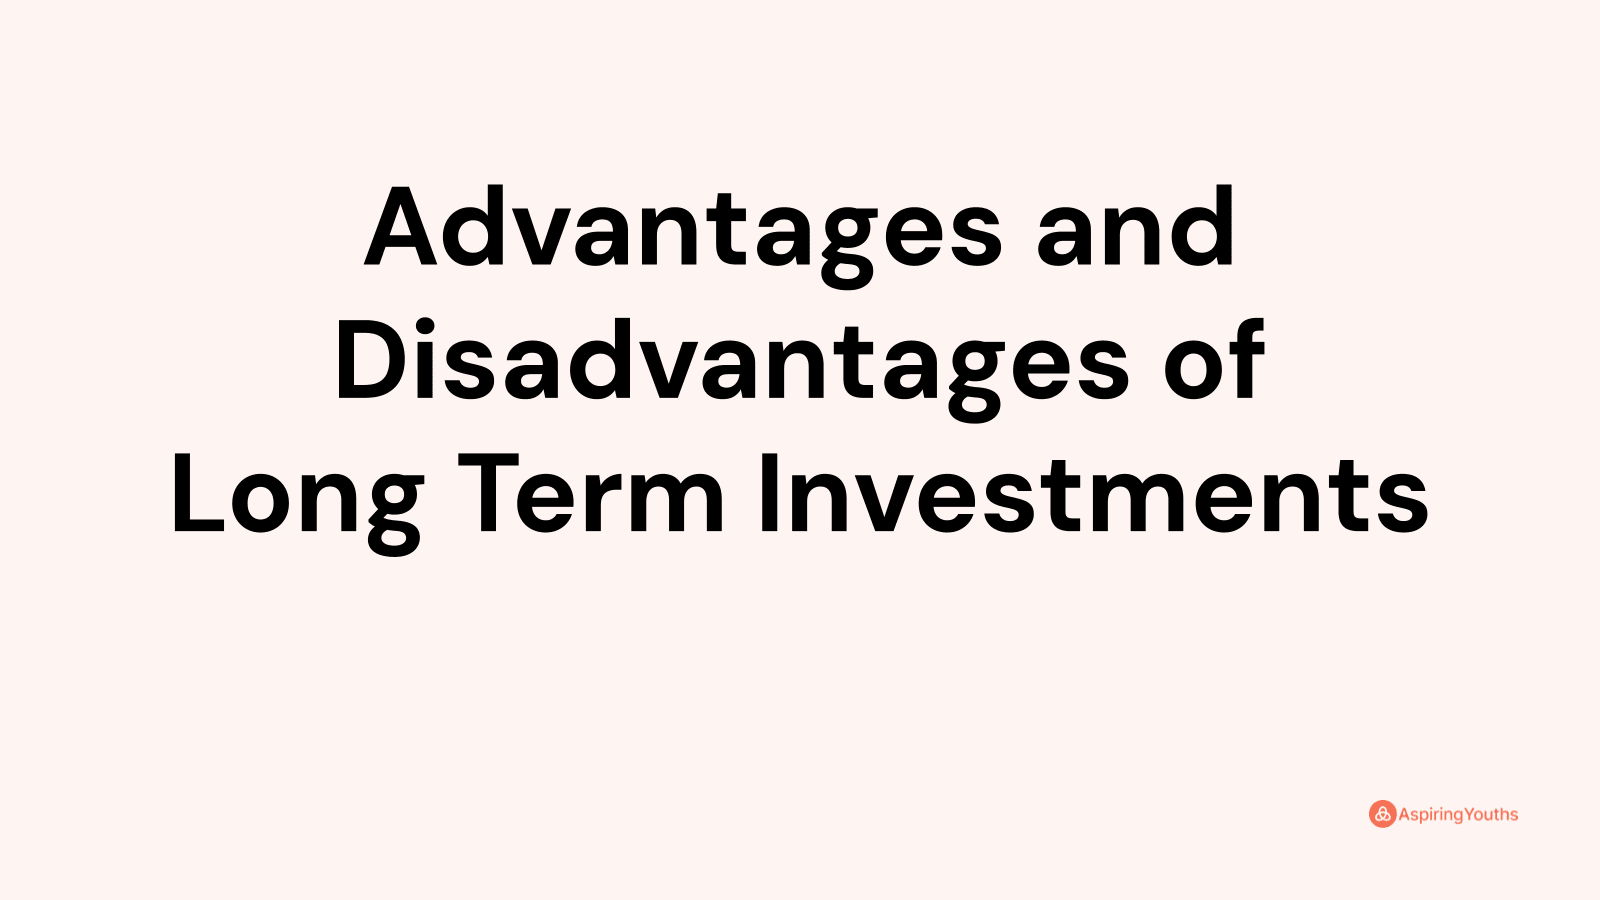 Advantages and disadvantages of Long Term Investments